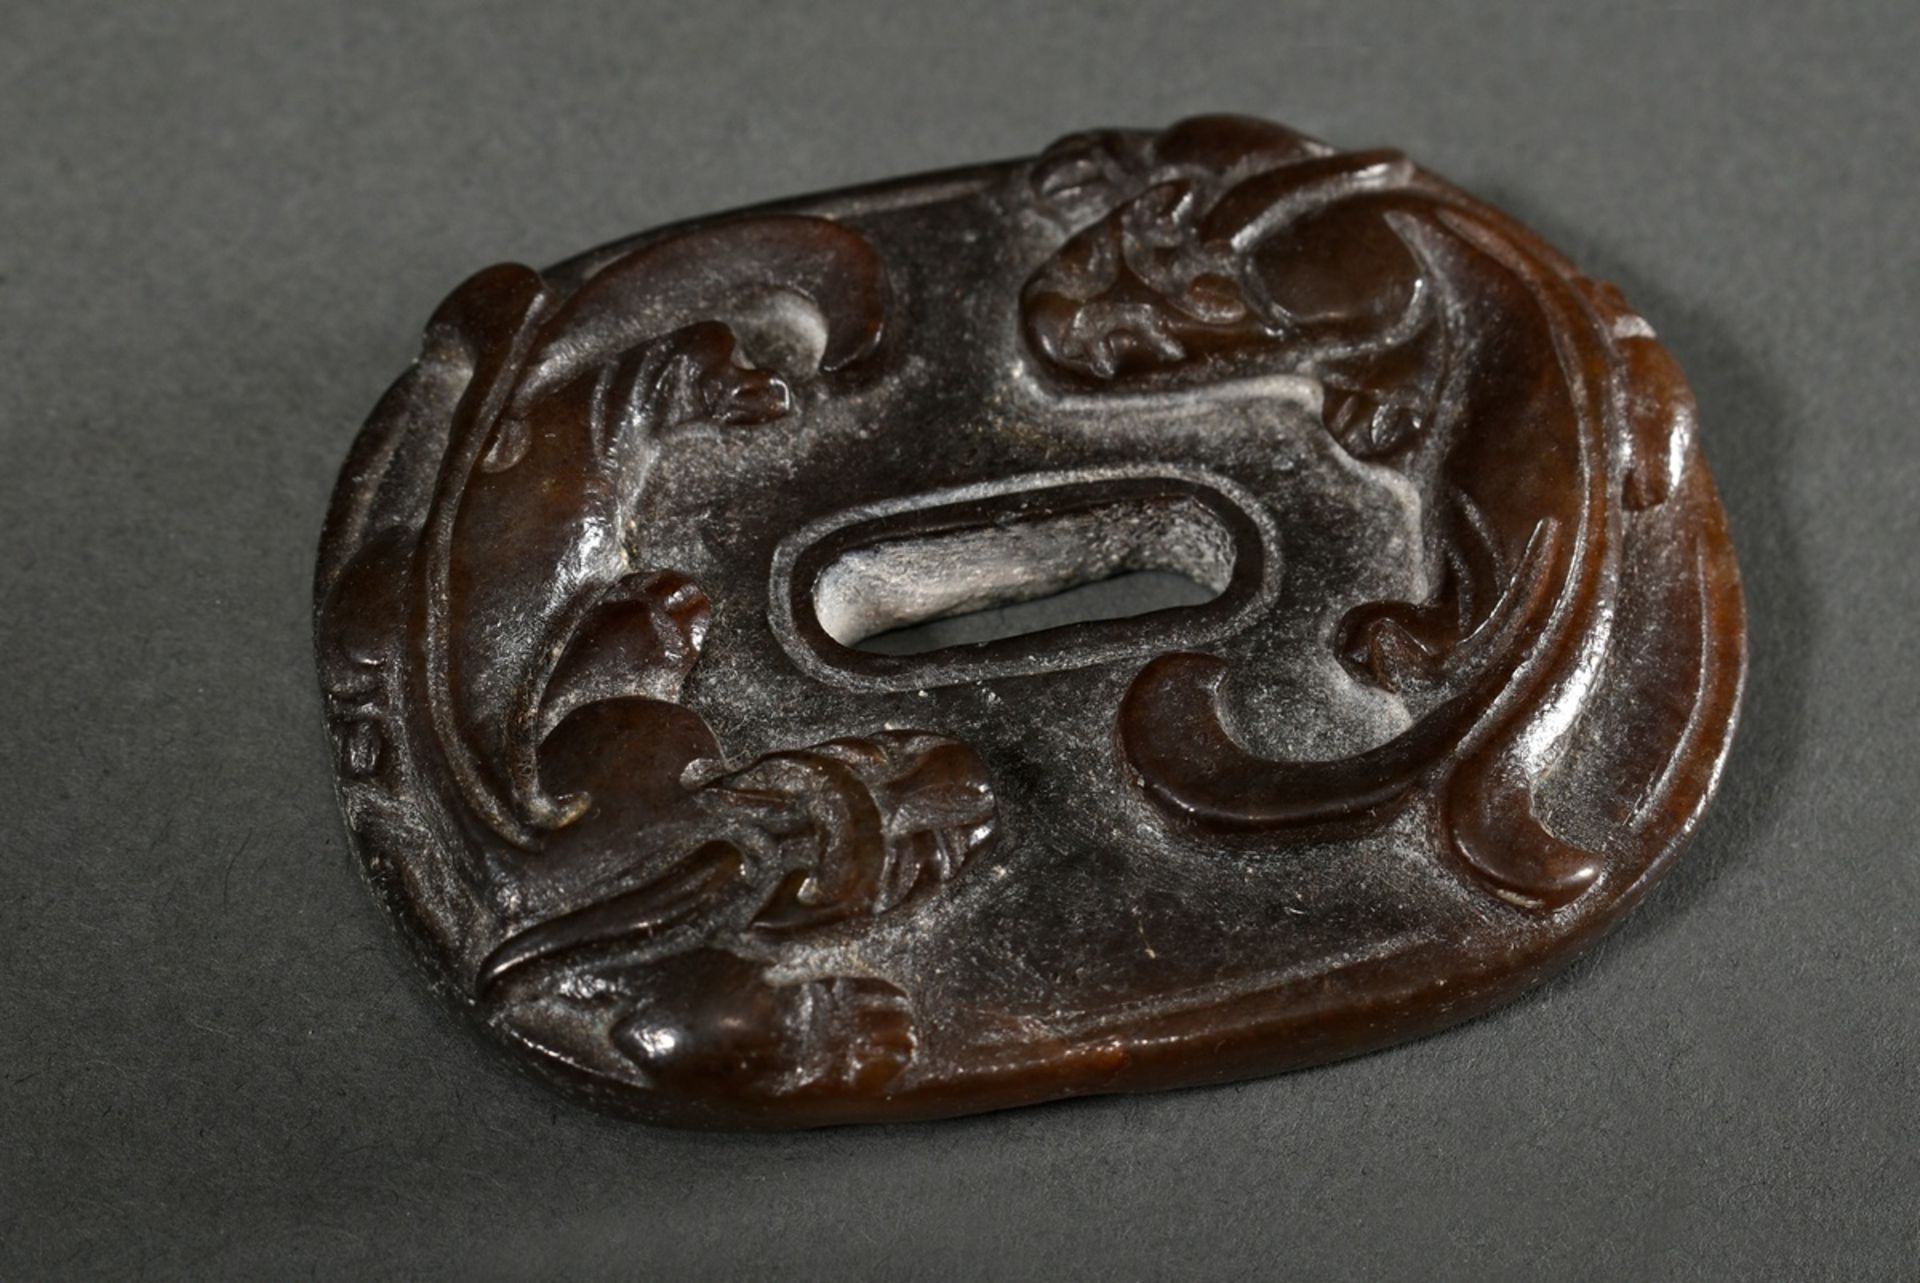 Oval dark brown jade in the shape of a Han period sword engraving with rain dragons and C ornaments